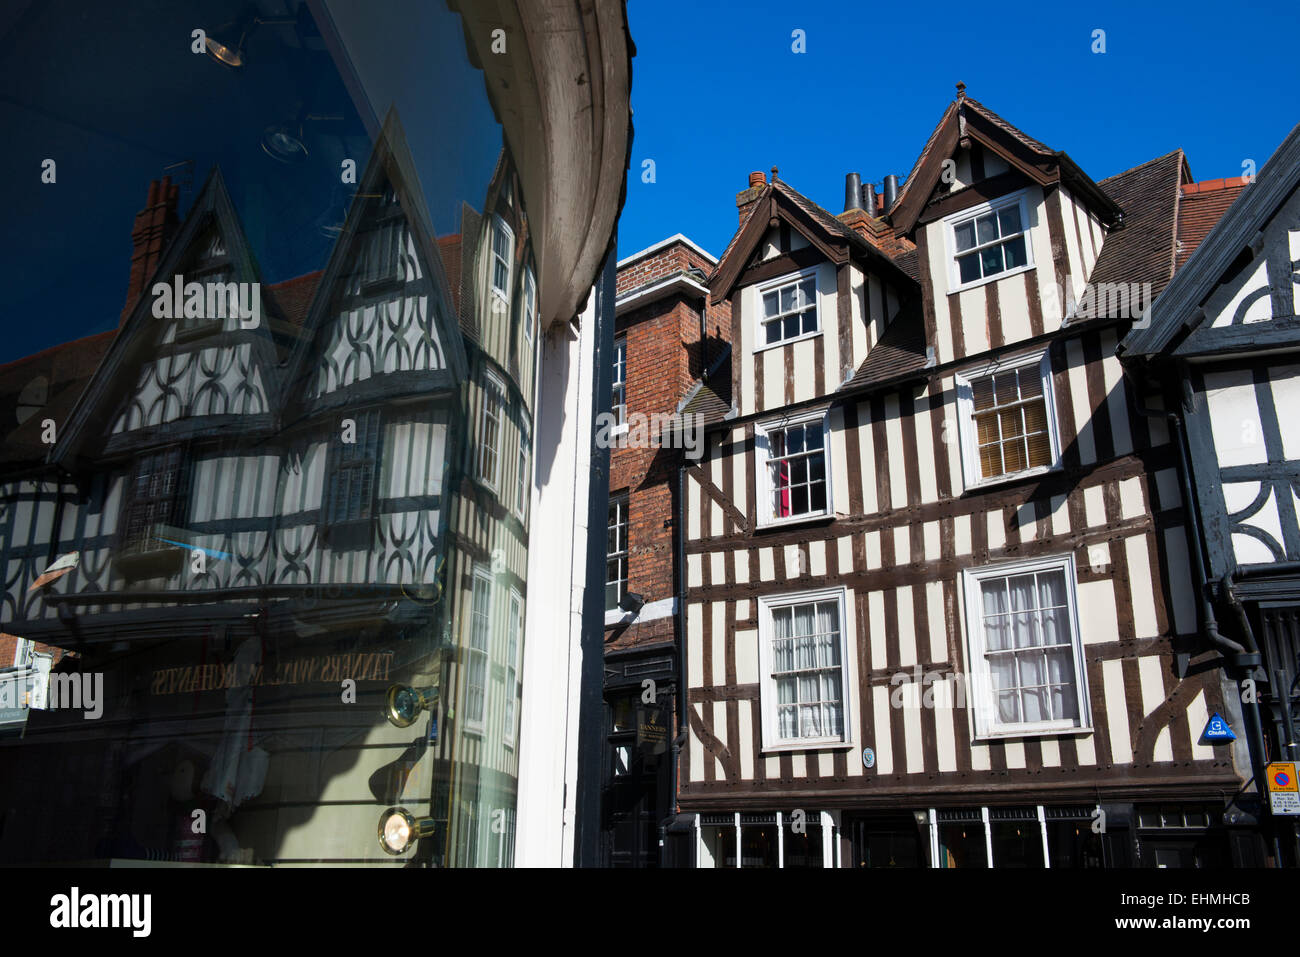 Timber-framed buildings on Wyle Cop reflected in a shop window, Shrewsbury, Shropshire. Stock Photo